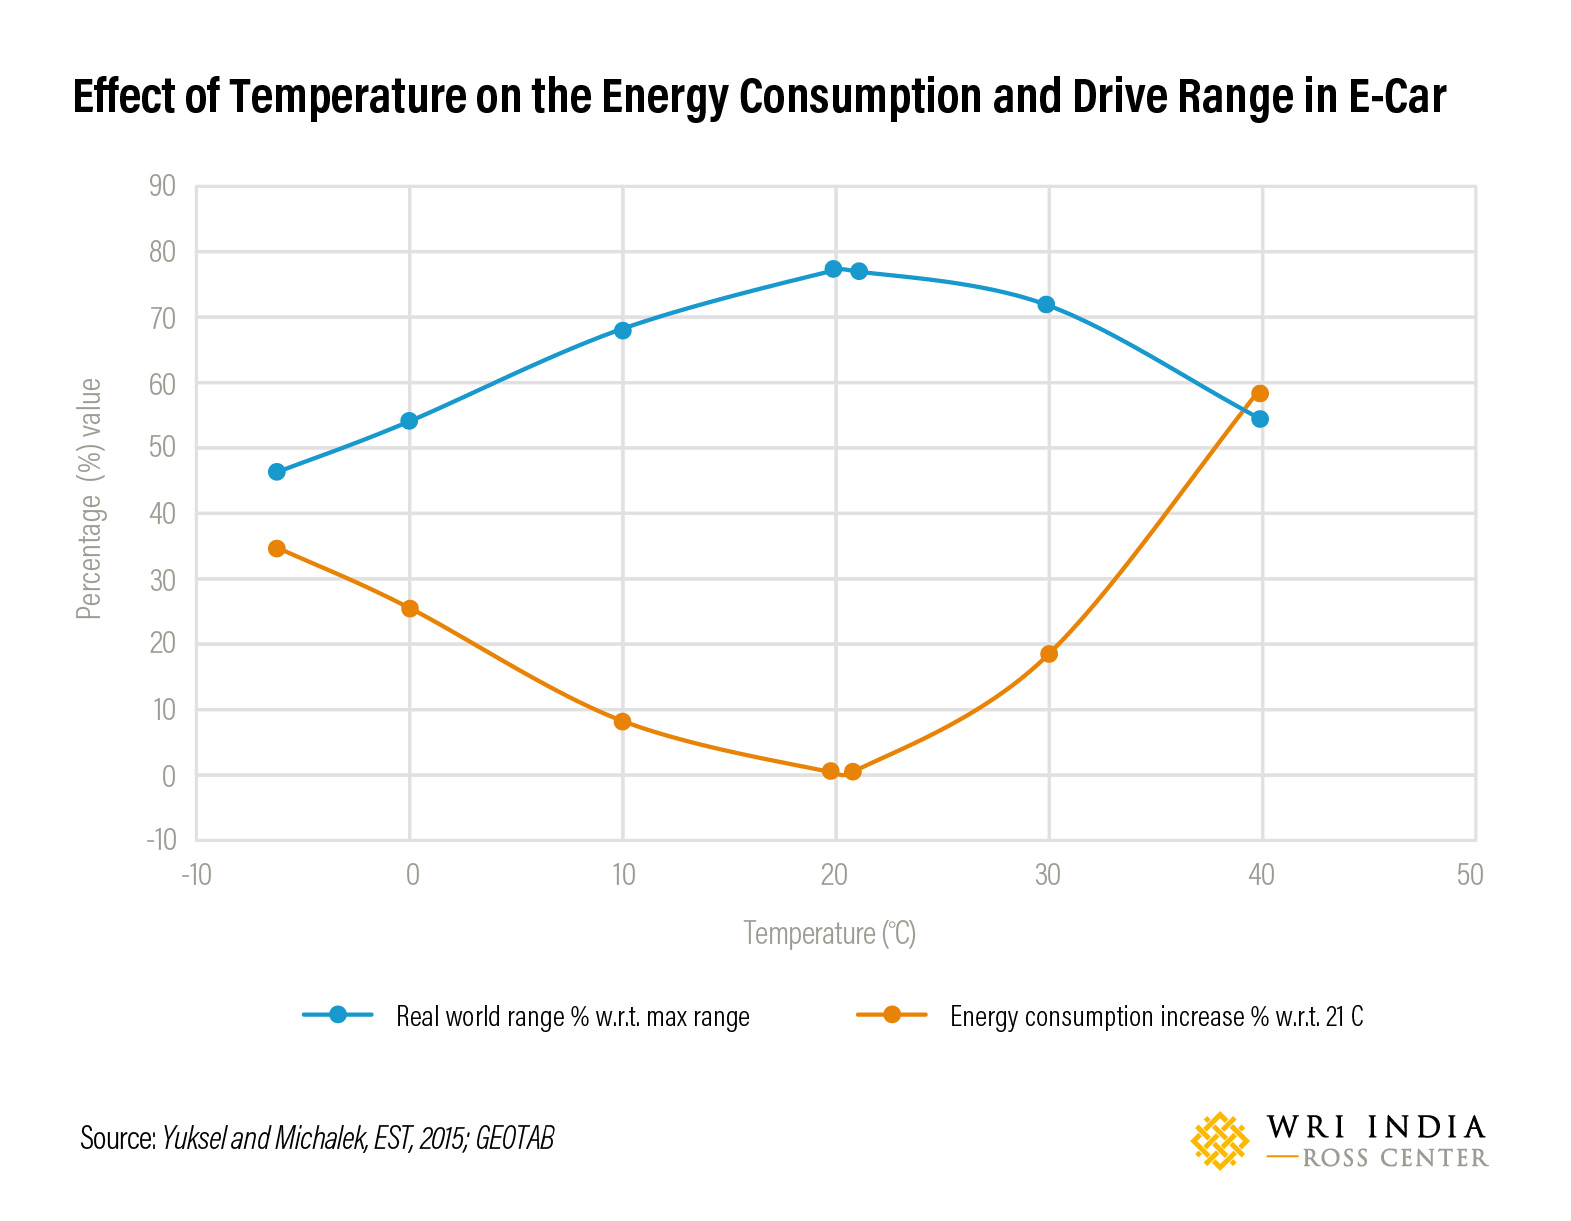 Figure 2: Effect of temperature on the energy consumption and drive range in e-car. (Data Source: Yuksel and Michalek, EST, 2015;GEOTAB)